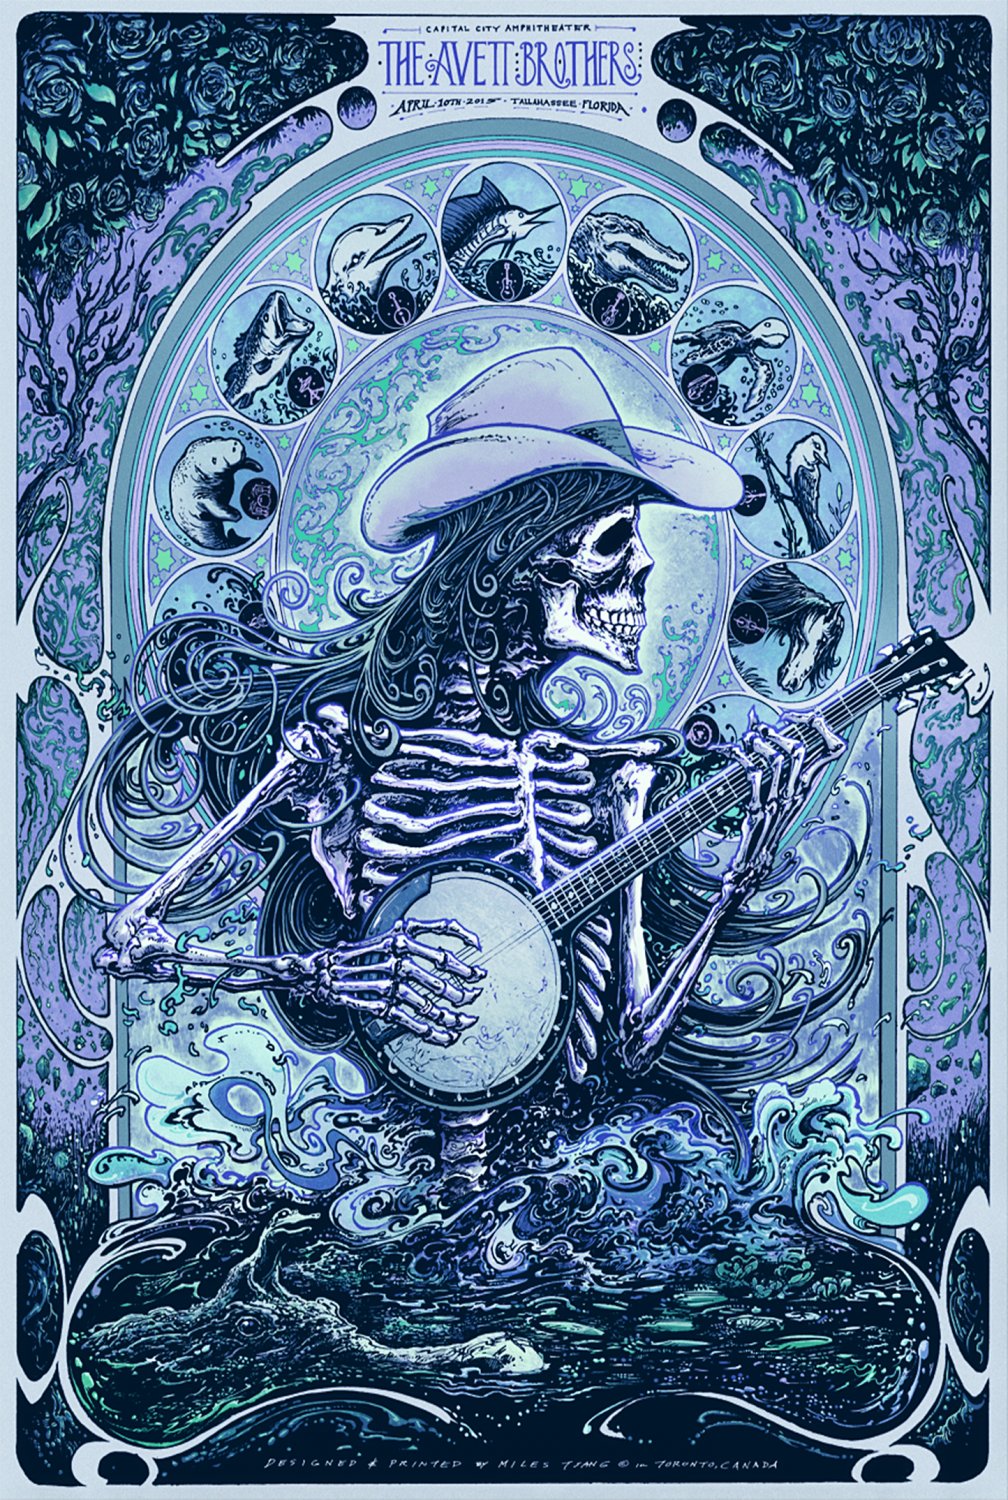 The Avett Brothers Concert Tour  13"x19" (32cm/49cm) Polyester Fabric Poster